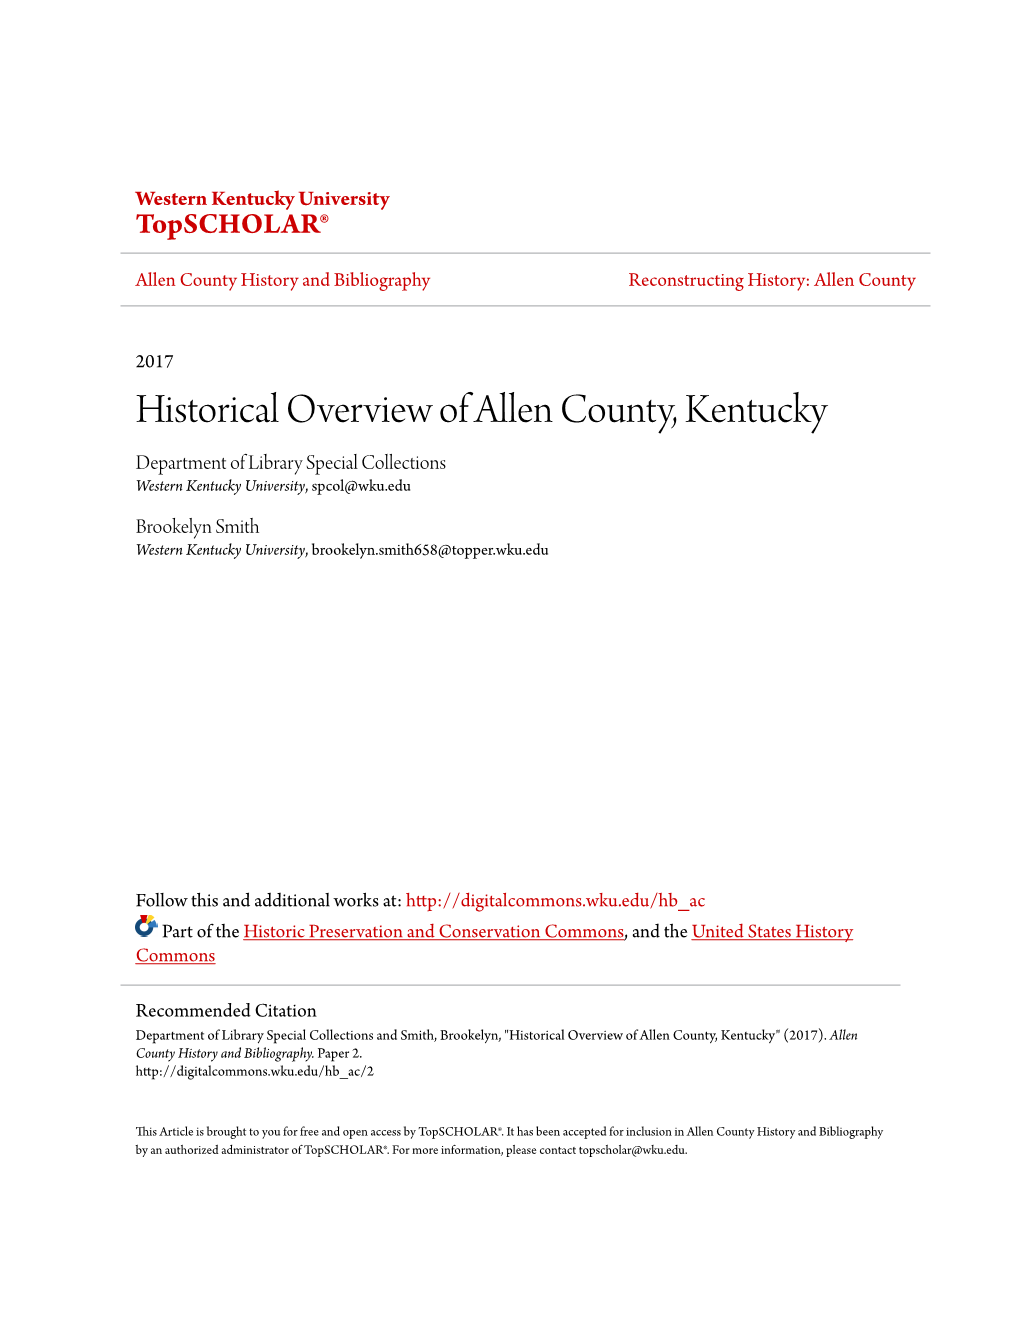 Historical Overview of Allen County, Kentucky Department of Library Special Collections Western Kentucky University, Spcol@Wku.Edu